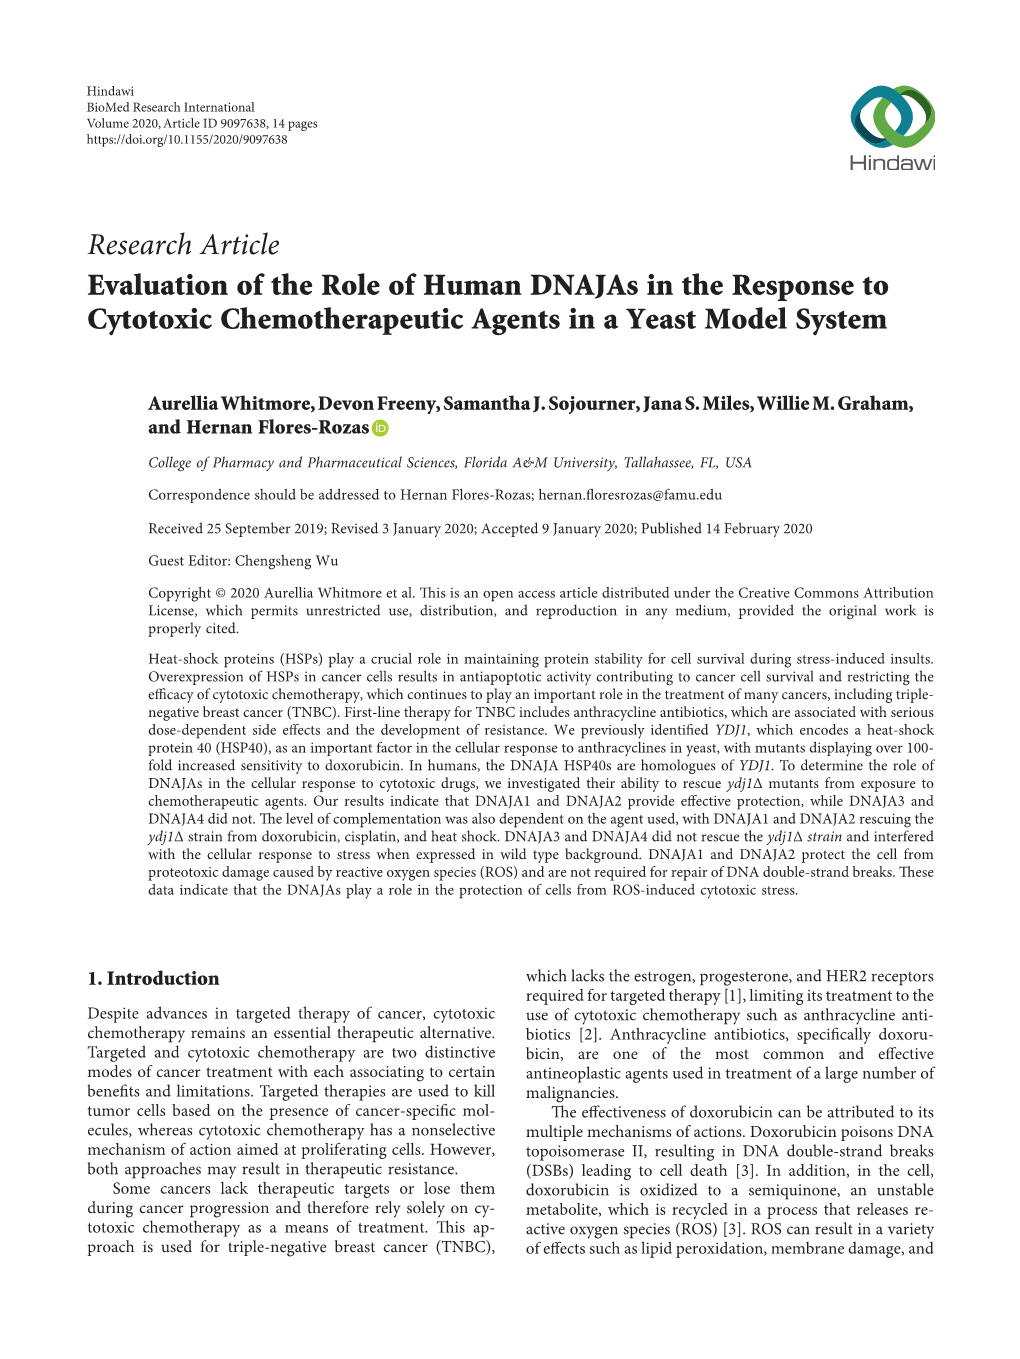 Evaluation of the Role of Human Dnajas in the Response to Cytotoxic Chemotherapeutic Agents in a Yeast Model System